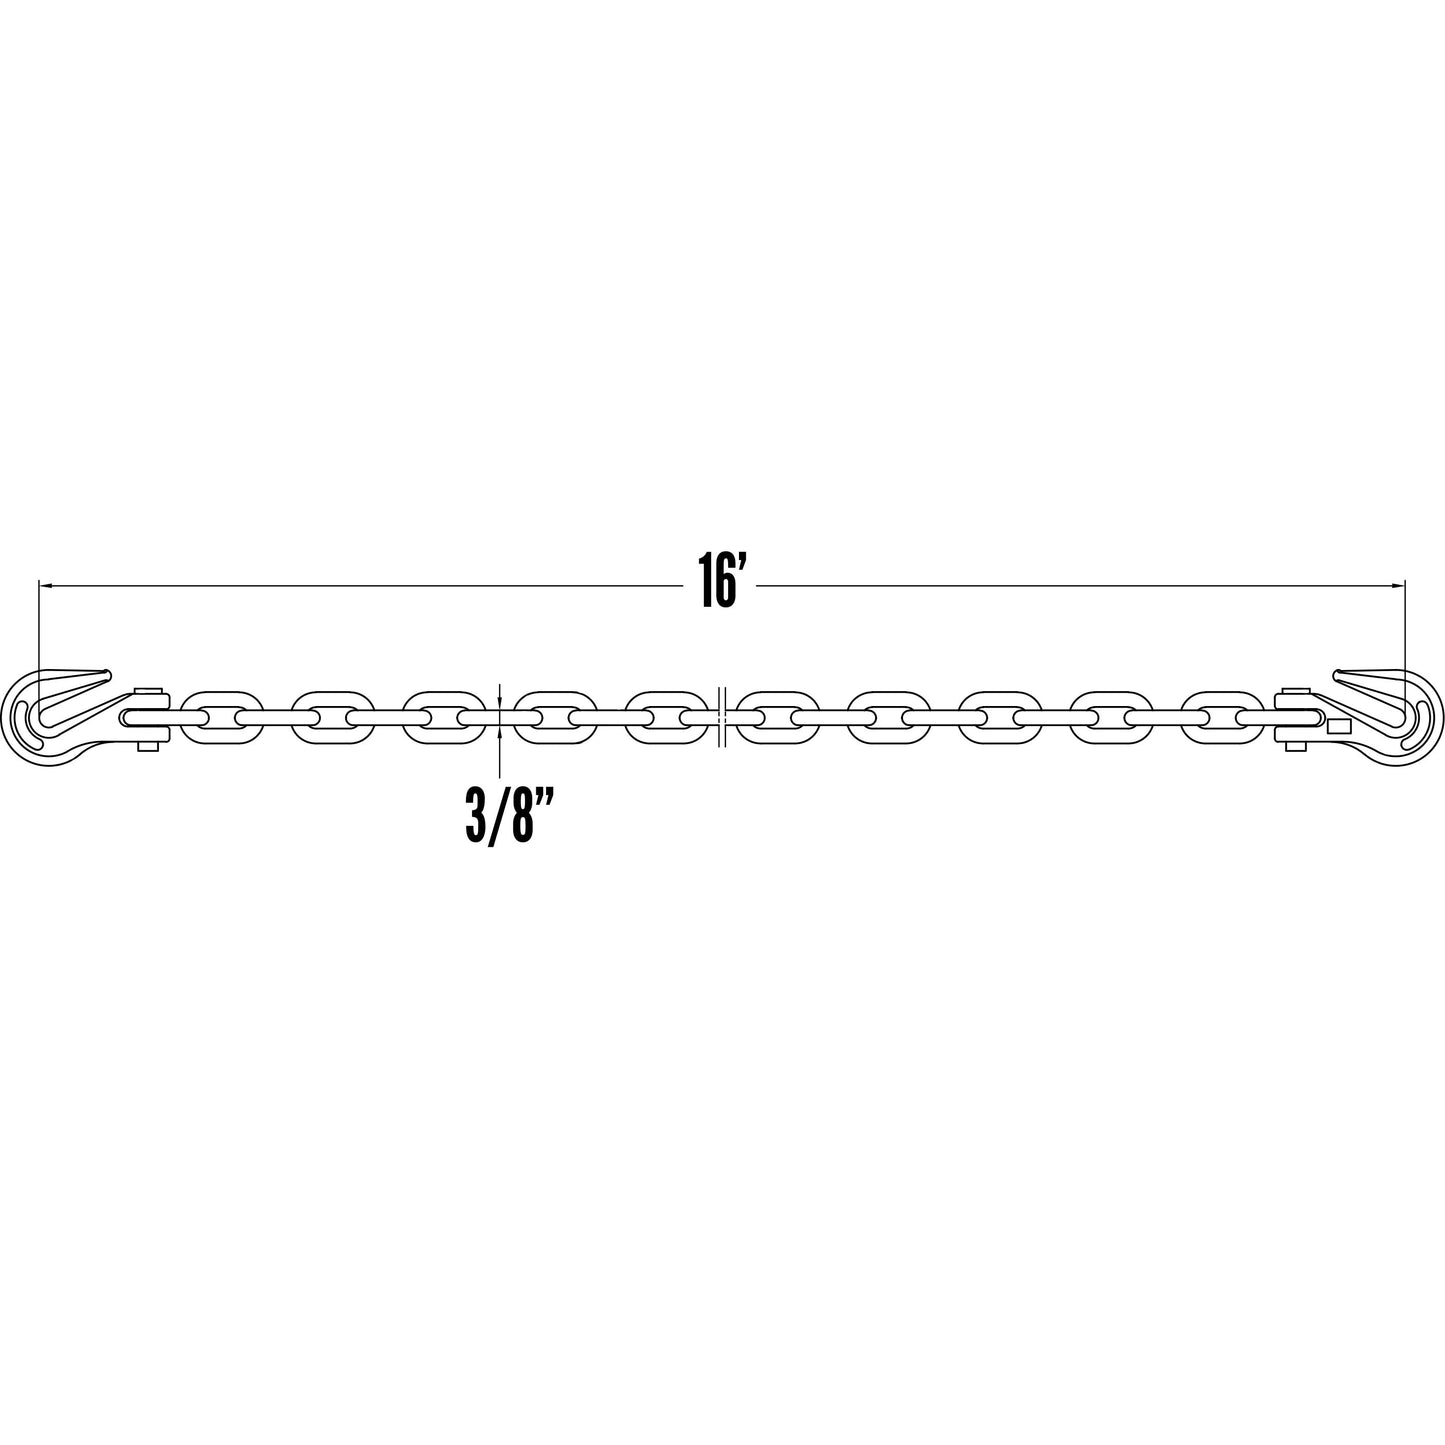 Transport Chain Grade 70 38 inch x 16 foot Standard Link image 4 of 8